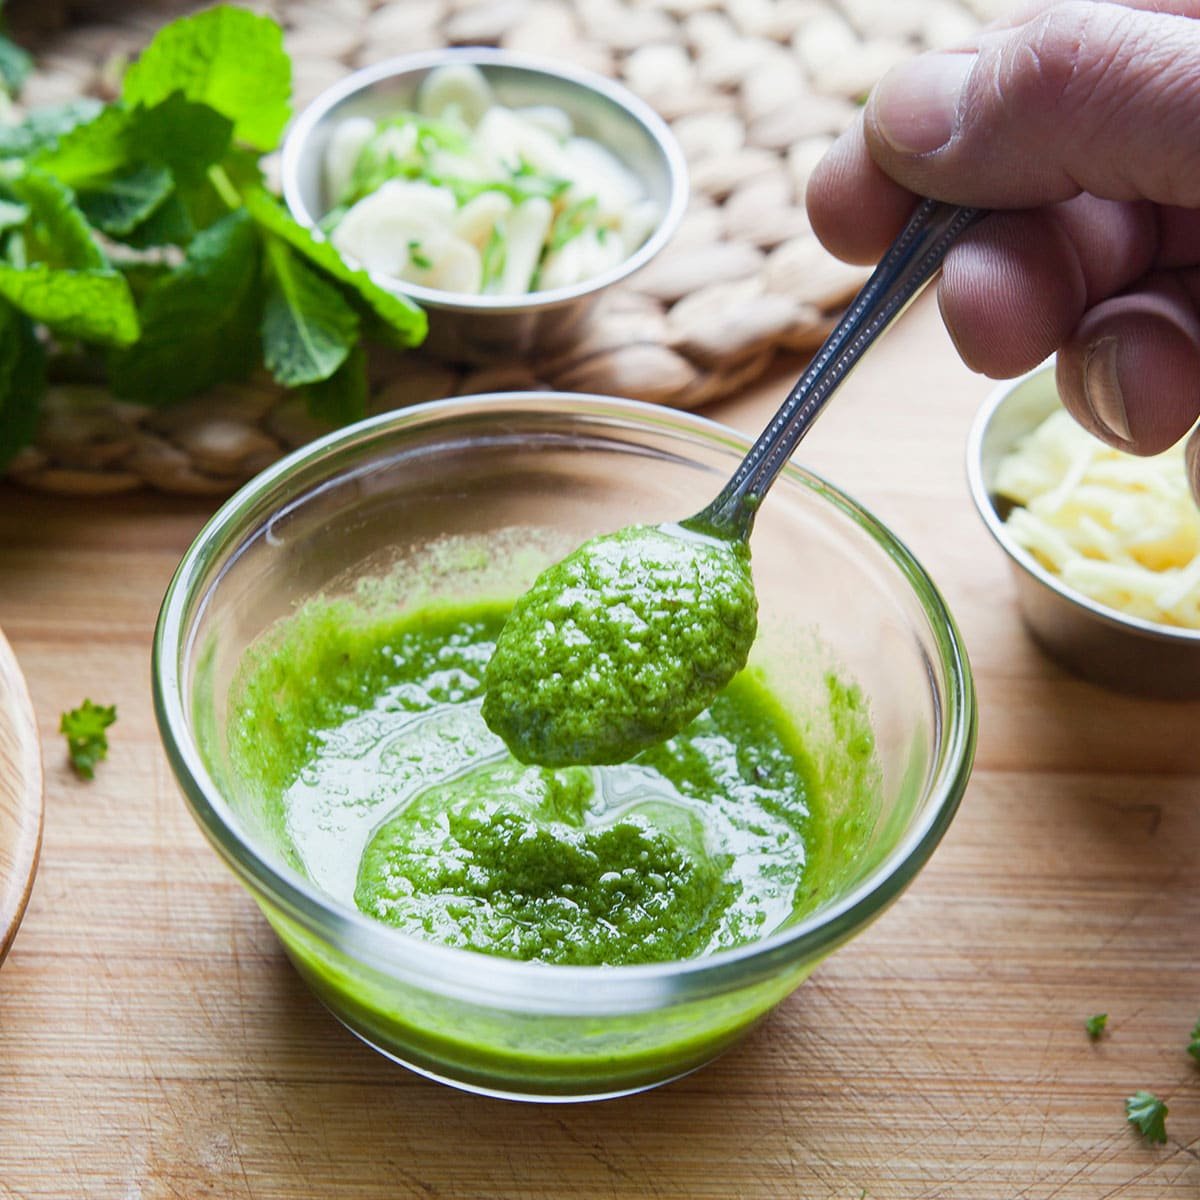 Glass bowl of homemade mint sauce with spoon, fresh ingredients in background.